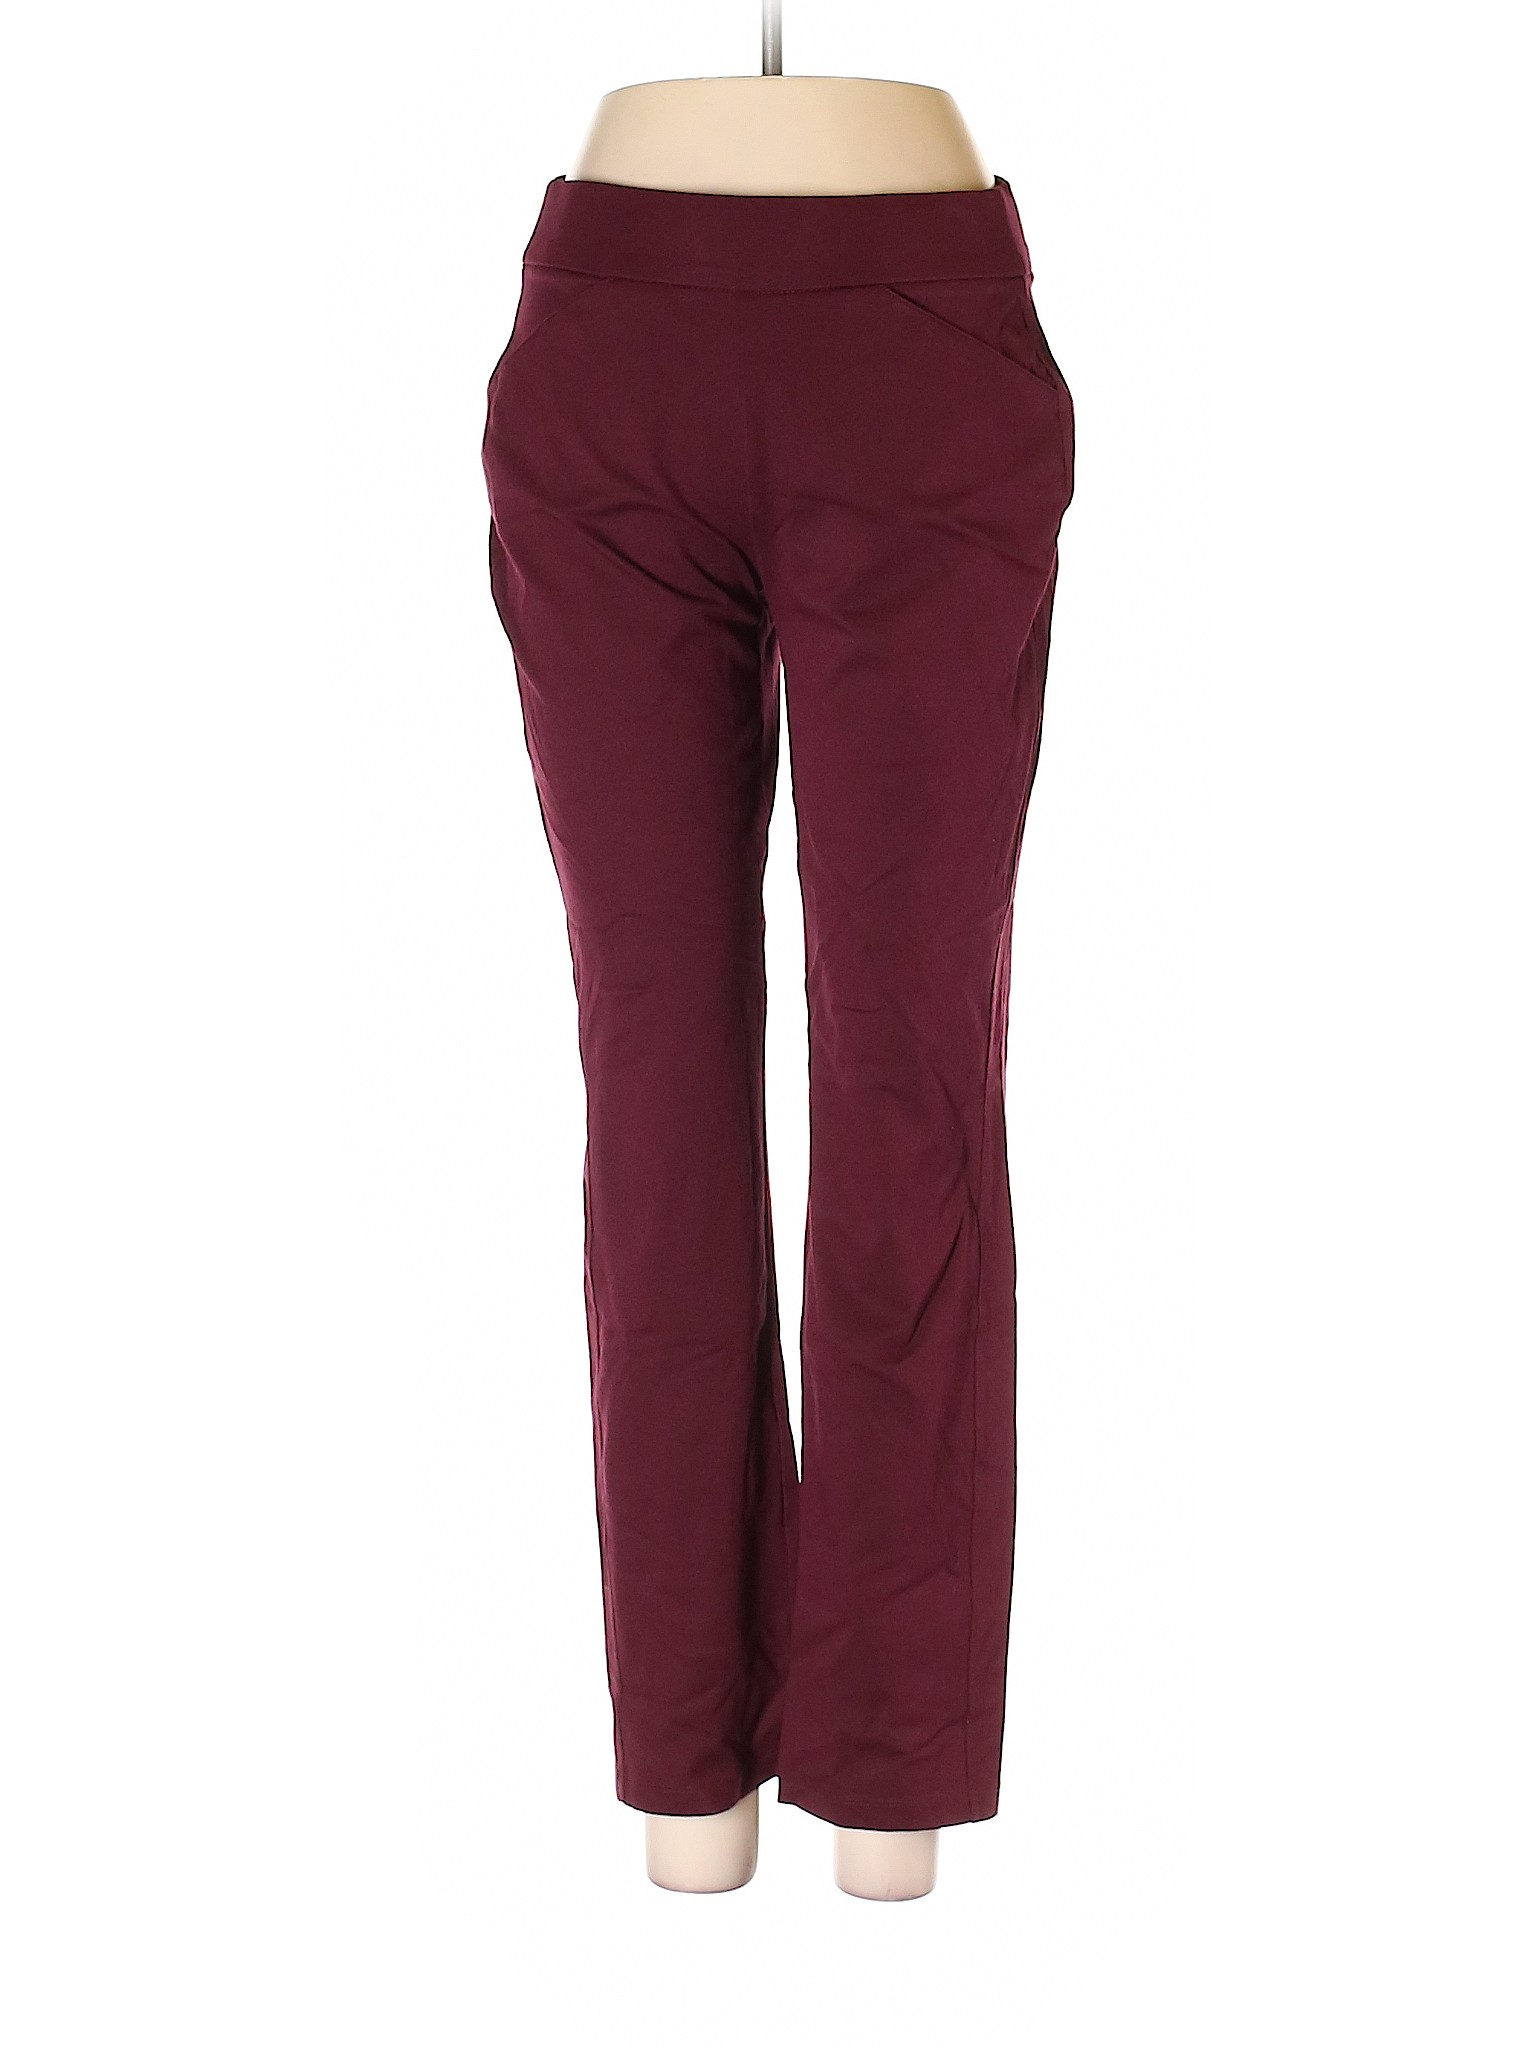 Chico's Solid Maroon Red Leggings Size XS (00) - 95% off | thredUP